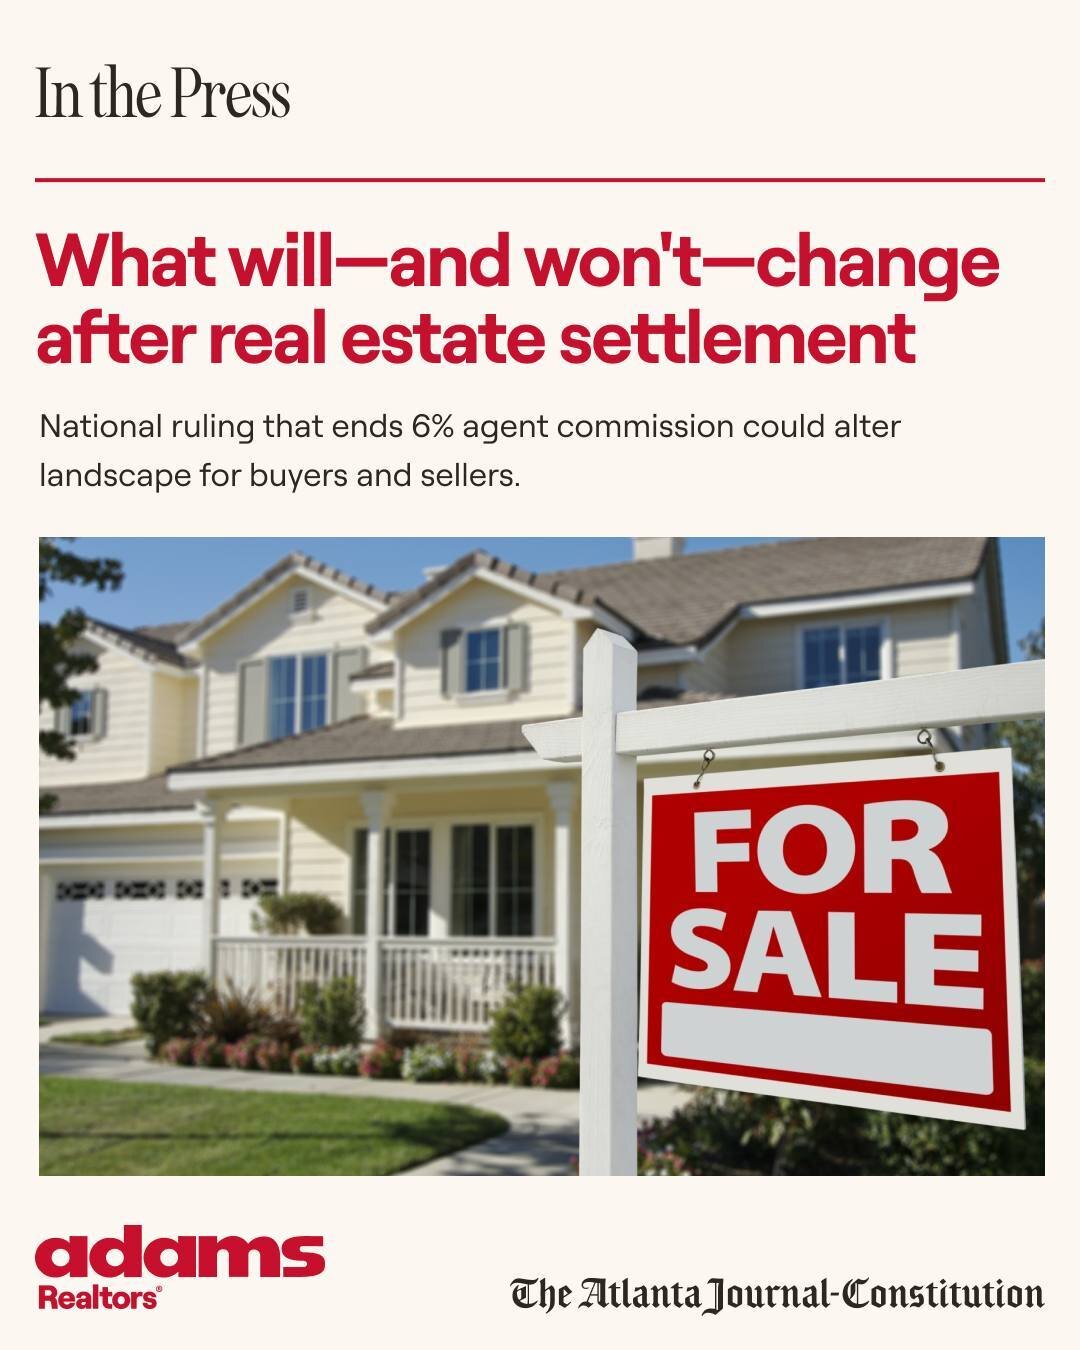 @ajcnews spoke with our founder, @billadamsrealtor about the recent real estate settlement and what it will mean for residential agents, sellers, and buyers. At the end of the day, residential real estate agents will work together just as commercial 